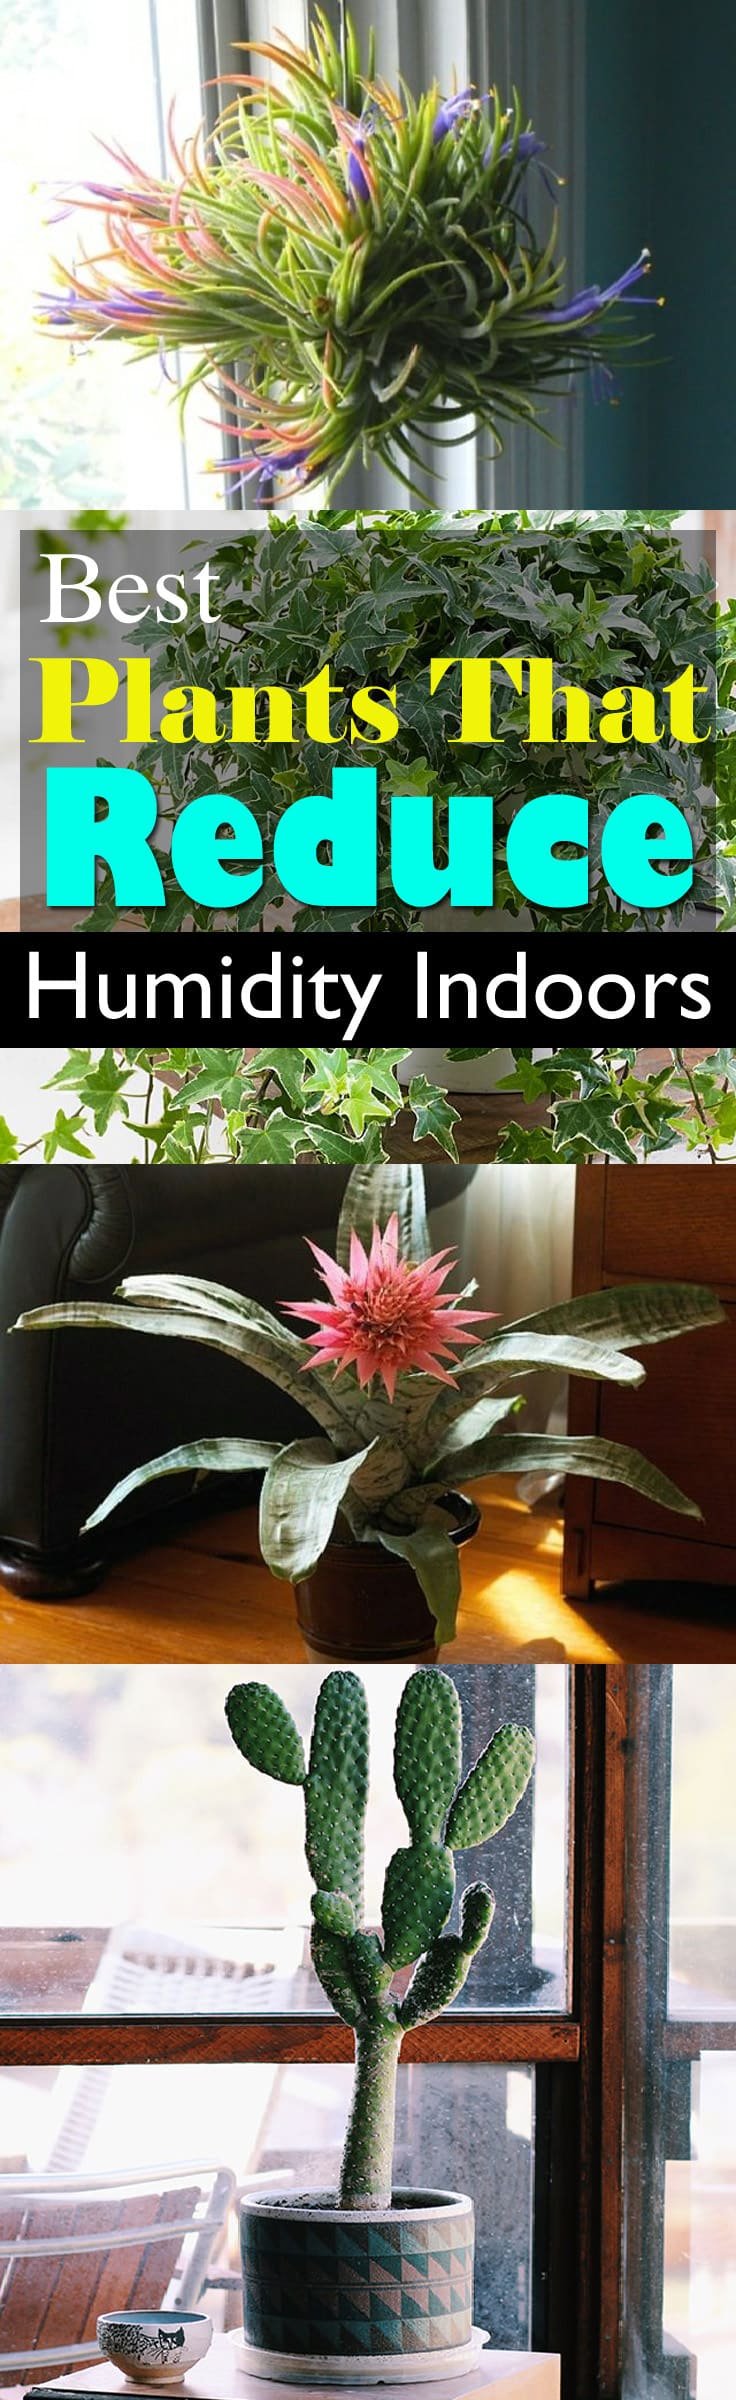 Cope with stickiness and extra moisture in the air by growing plants that reduce humidity indoors. They work. Check out!